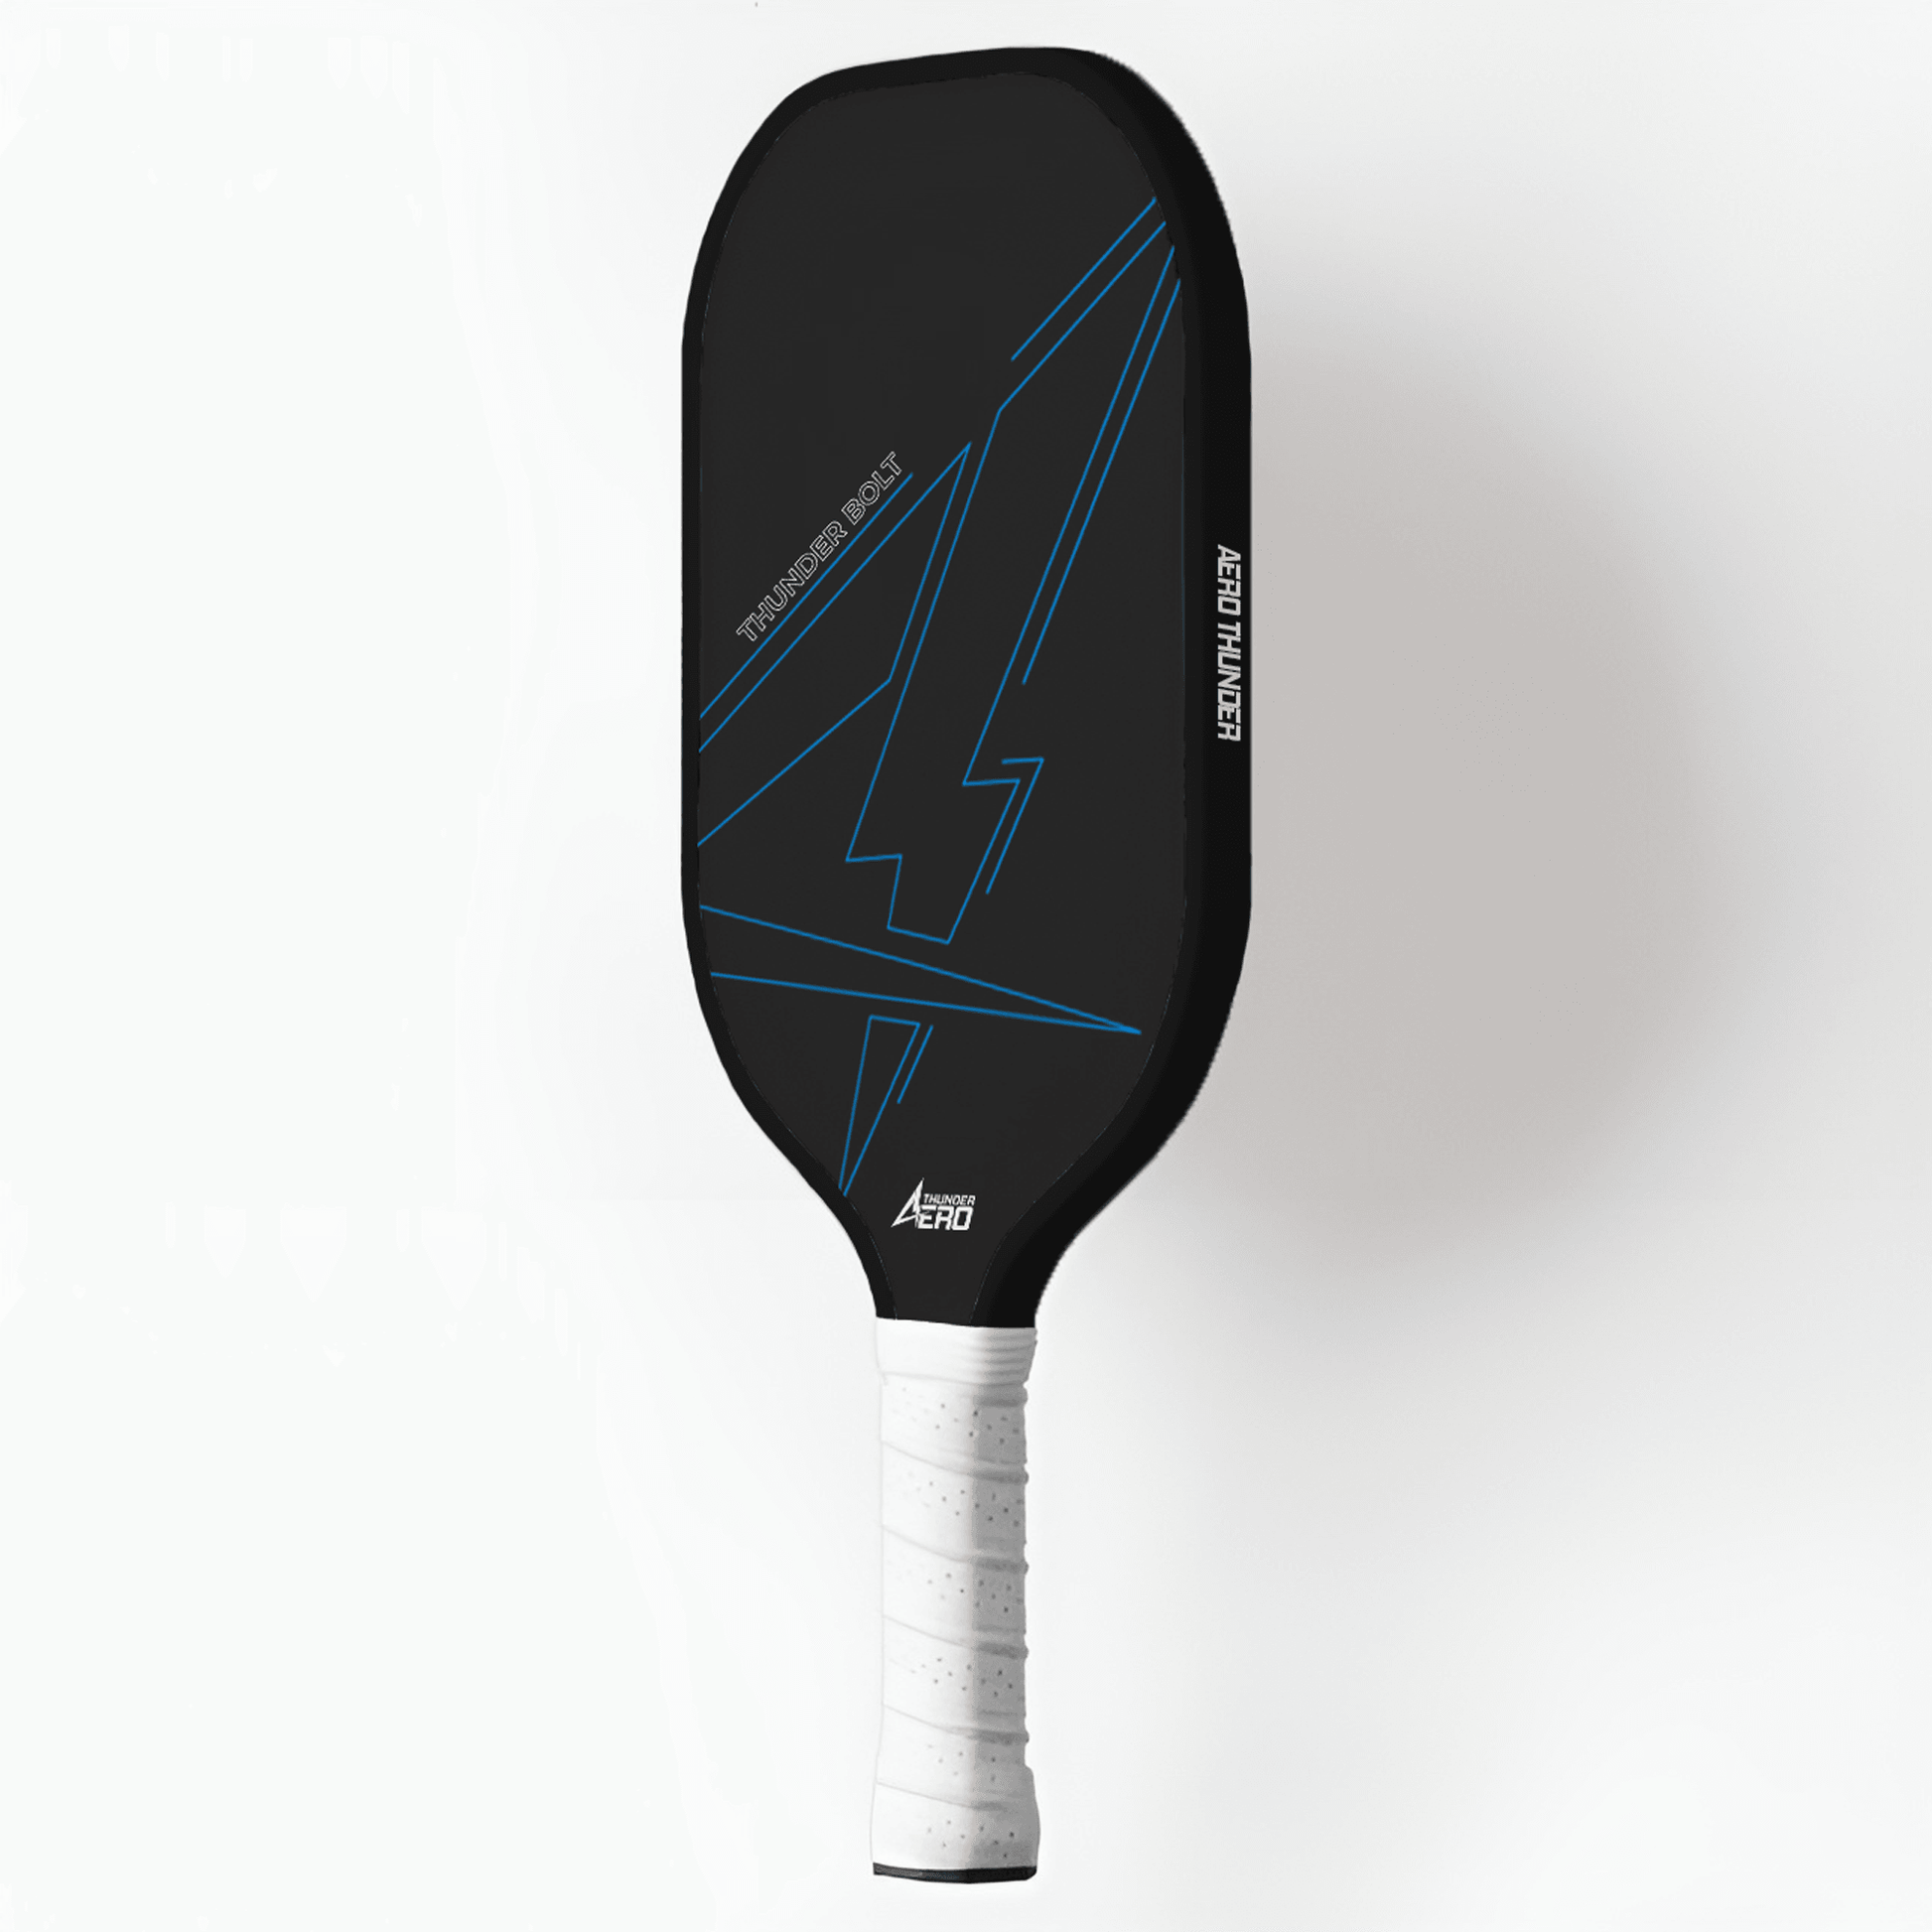 Epic drive Edition Best Professional Pickleball Paddle Brand AT-2000 Blue - Aero Thunder